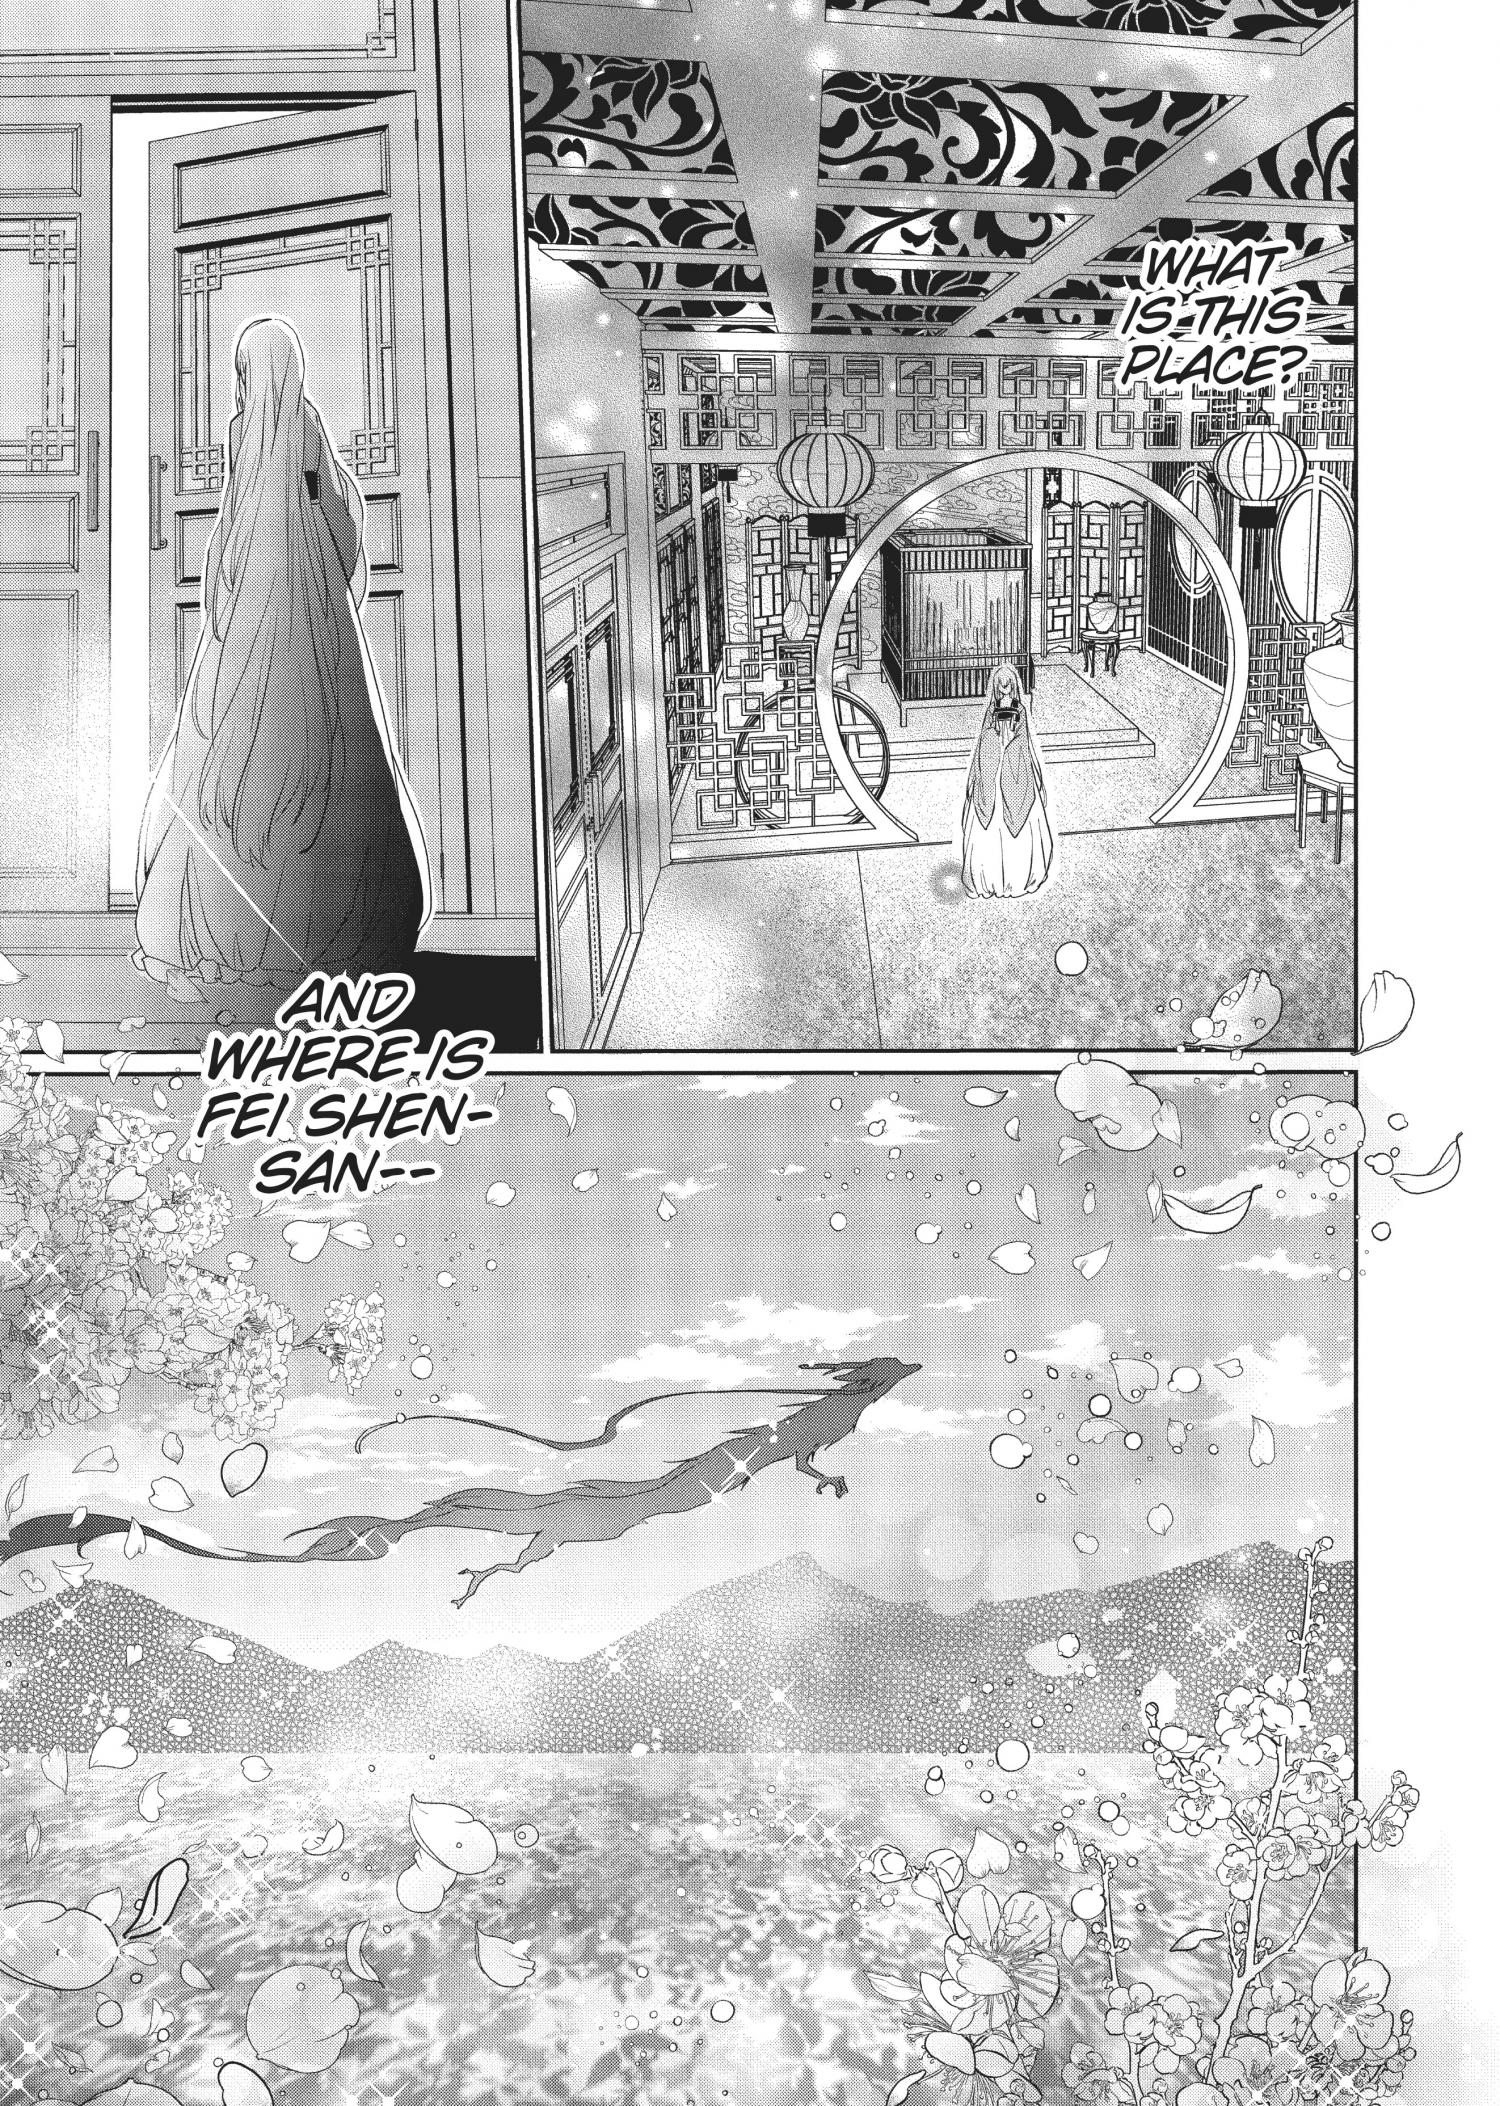 Outbride -Ikei Konin- - 16 page 6-7c5bf45a